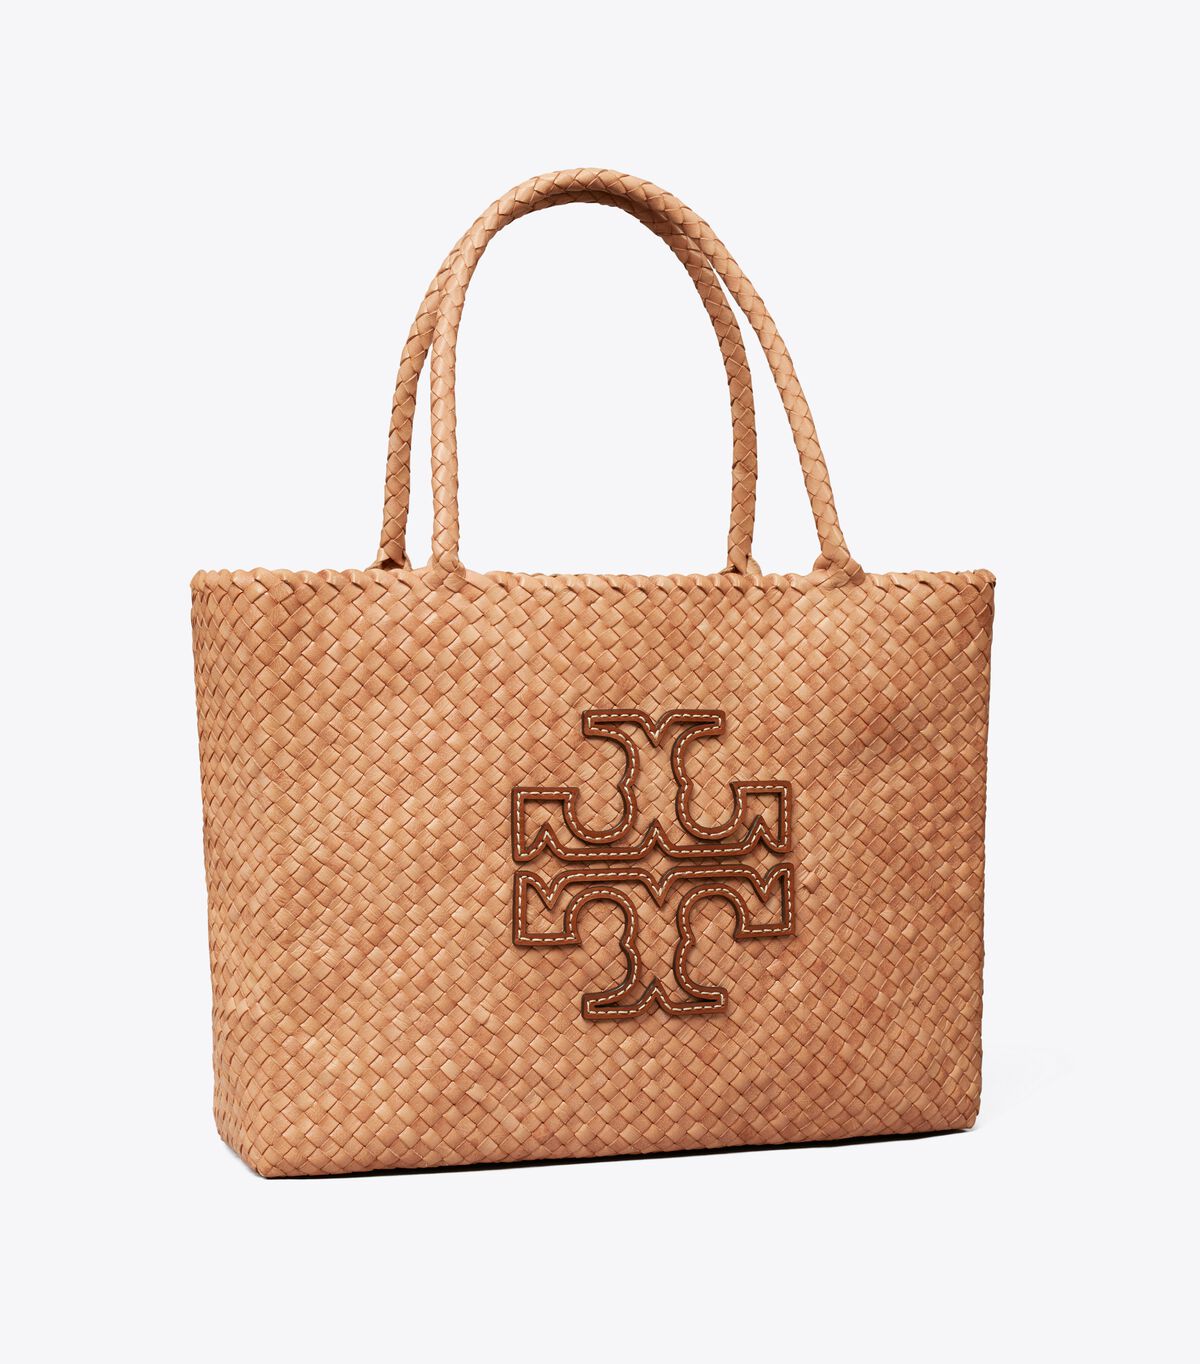 Beige Tory Burch Mcgraw Dragon Woven Women's Tote Bags | OUTLET-80152379